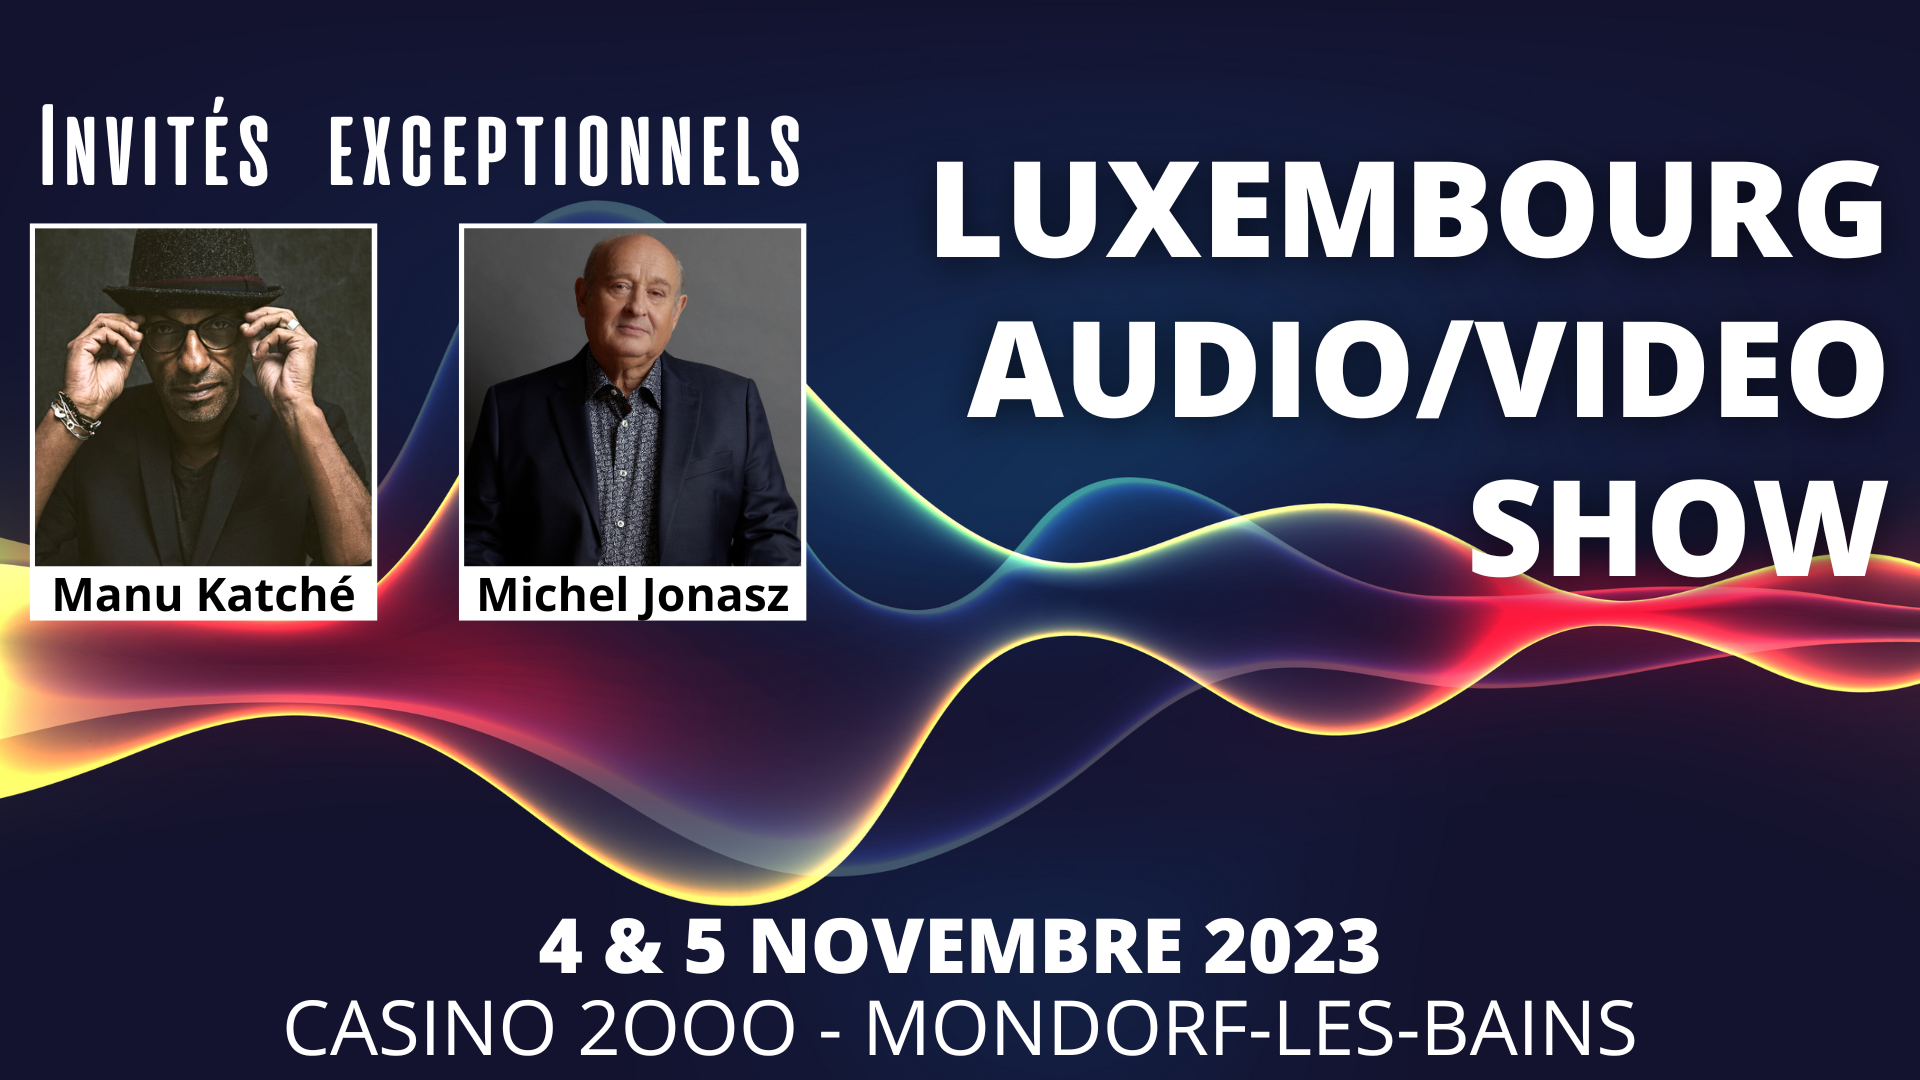 Luxembourg audio/video show